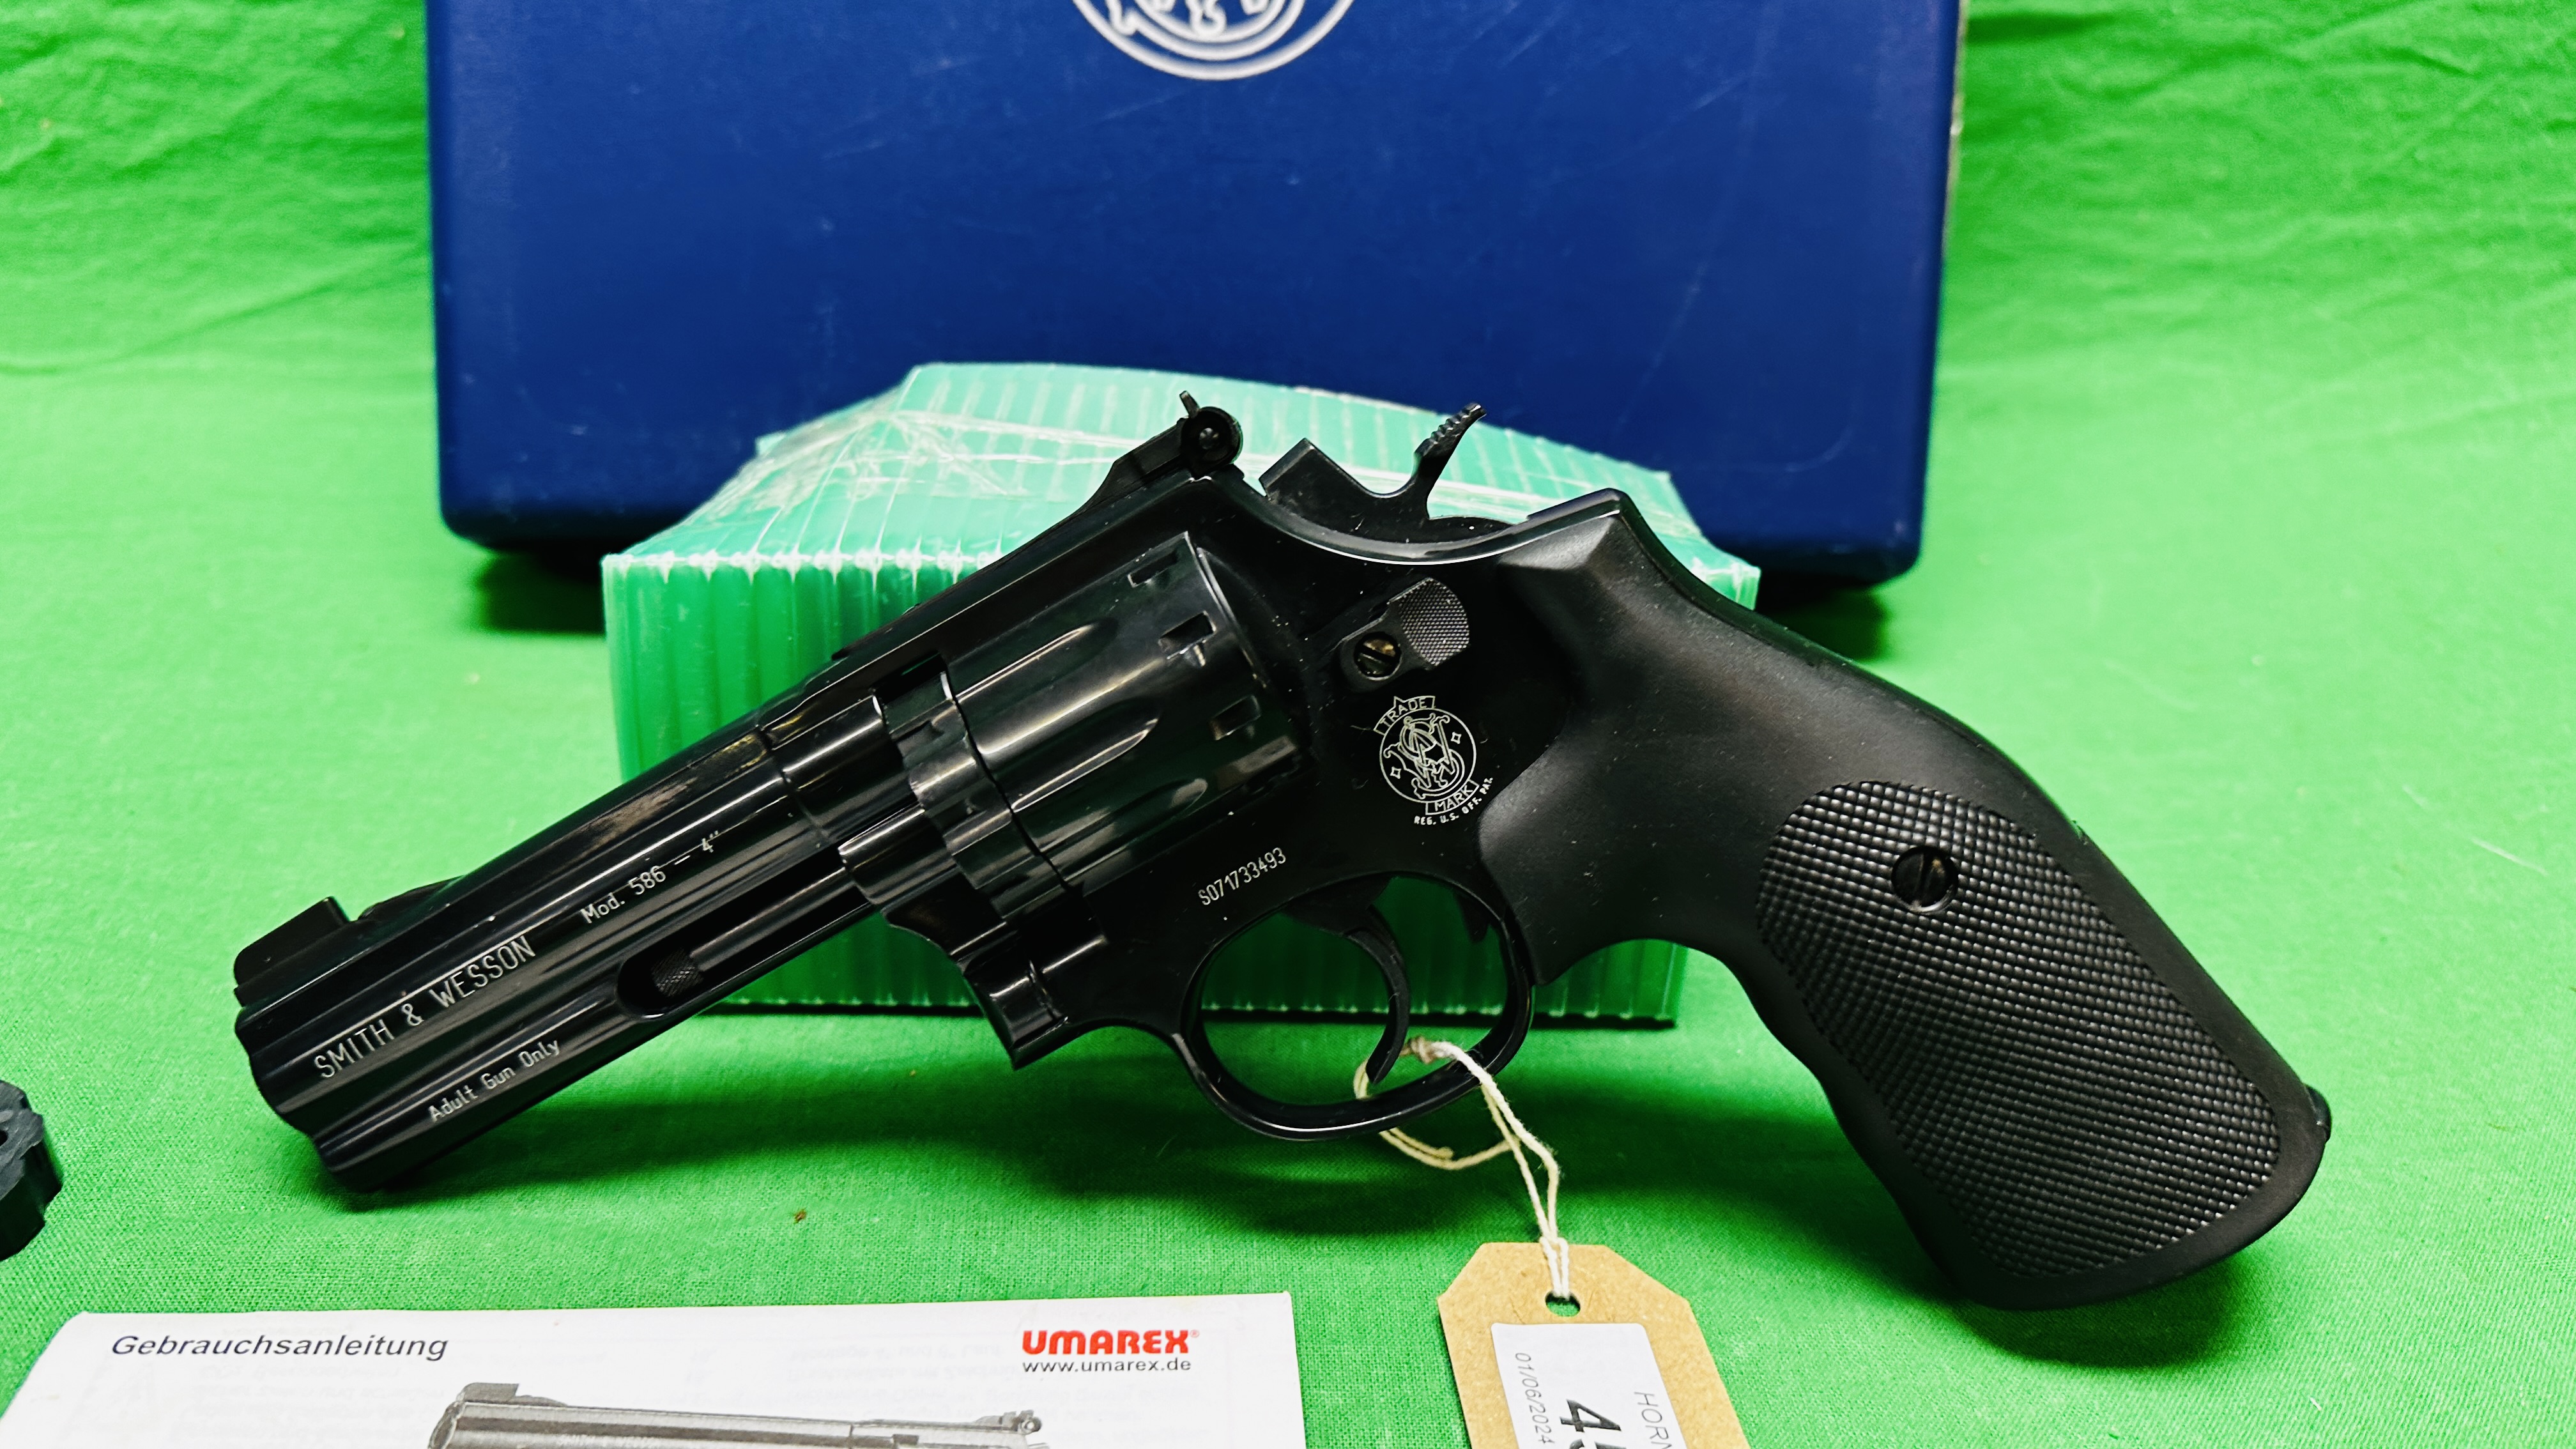 AN UMAREX SMITH & WESSON CO2 . - Image 2 of 12